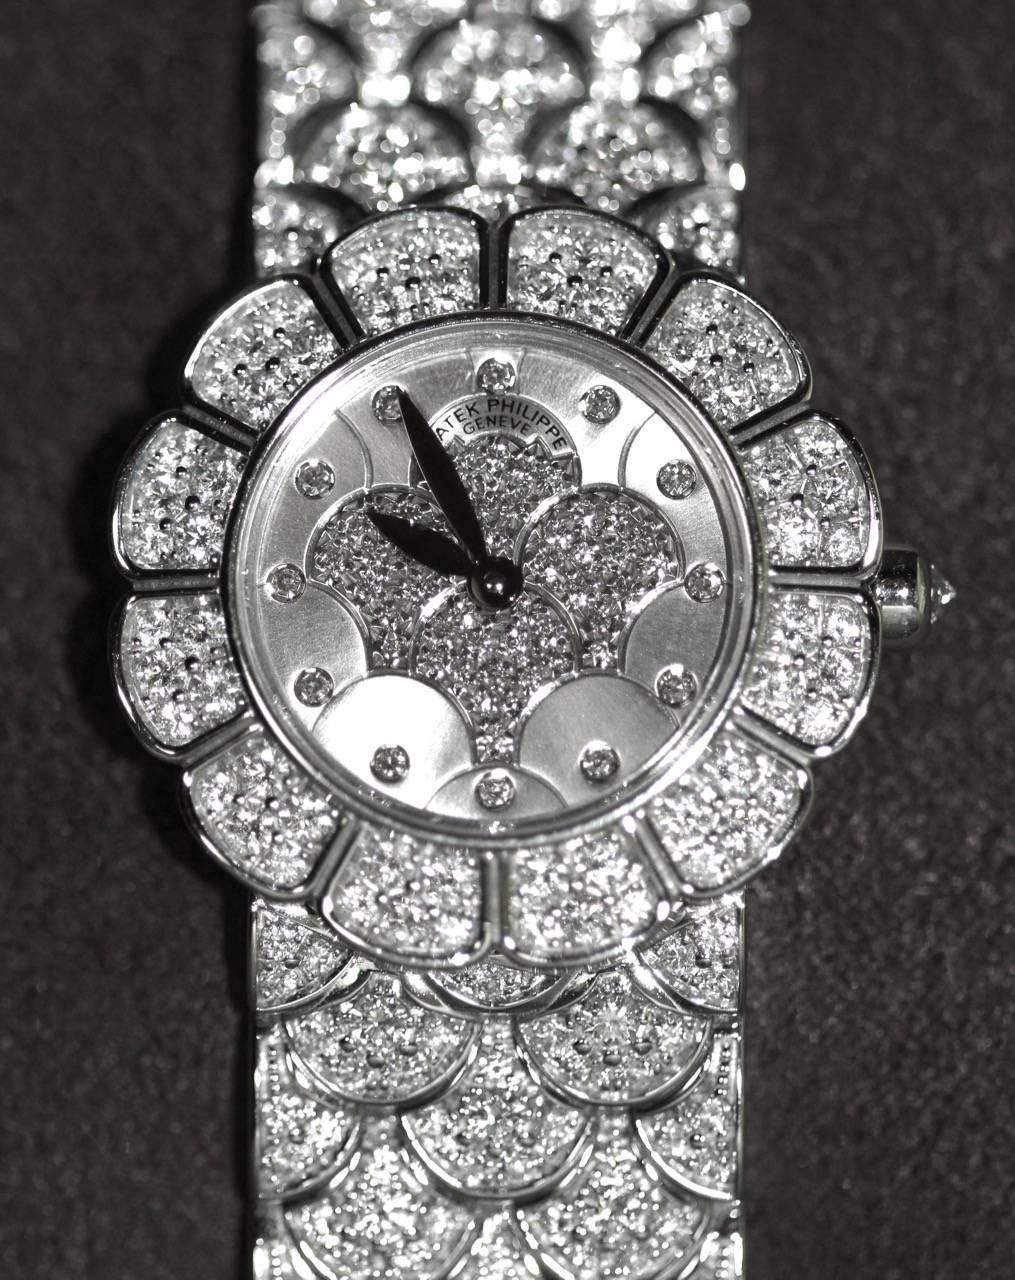 Stunning pre-owned Patek Philippe Ladies Watch. 
Barely worn, the watch is like new.

Ref: 4872/2G-001
Caliber: E-15 Quartz 
Movement Jewels: 6R
Case and dial set with 202 diamonds: 2.28 Ct
Dial: Pavé-set diamond bezel in the form of petals
Case: